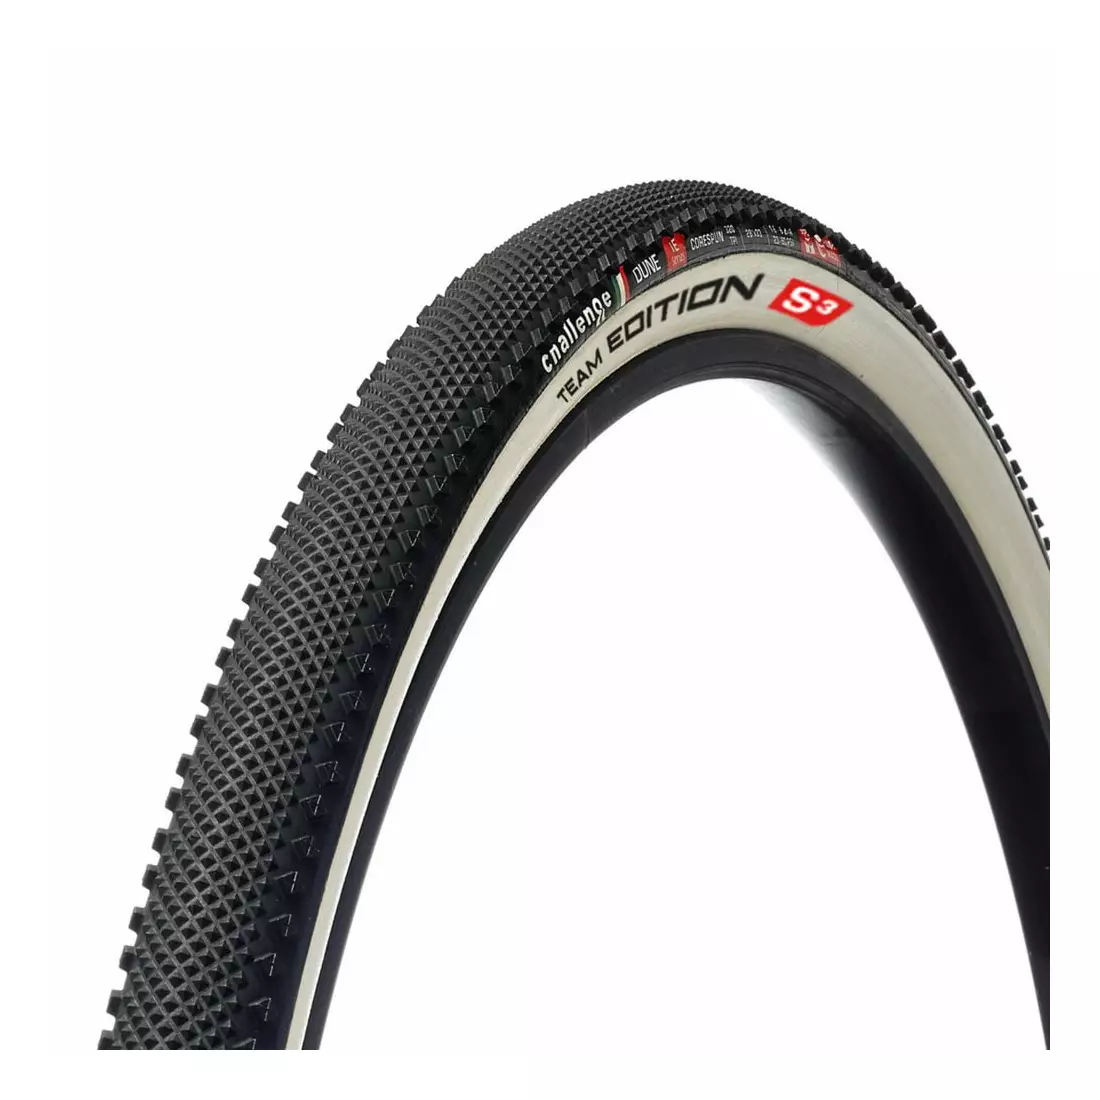 CHALLENGE DUNE TEAM EDITION S cyclocross tire tubular 28&quot; (700x33c) 320 TPI, black and white